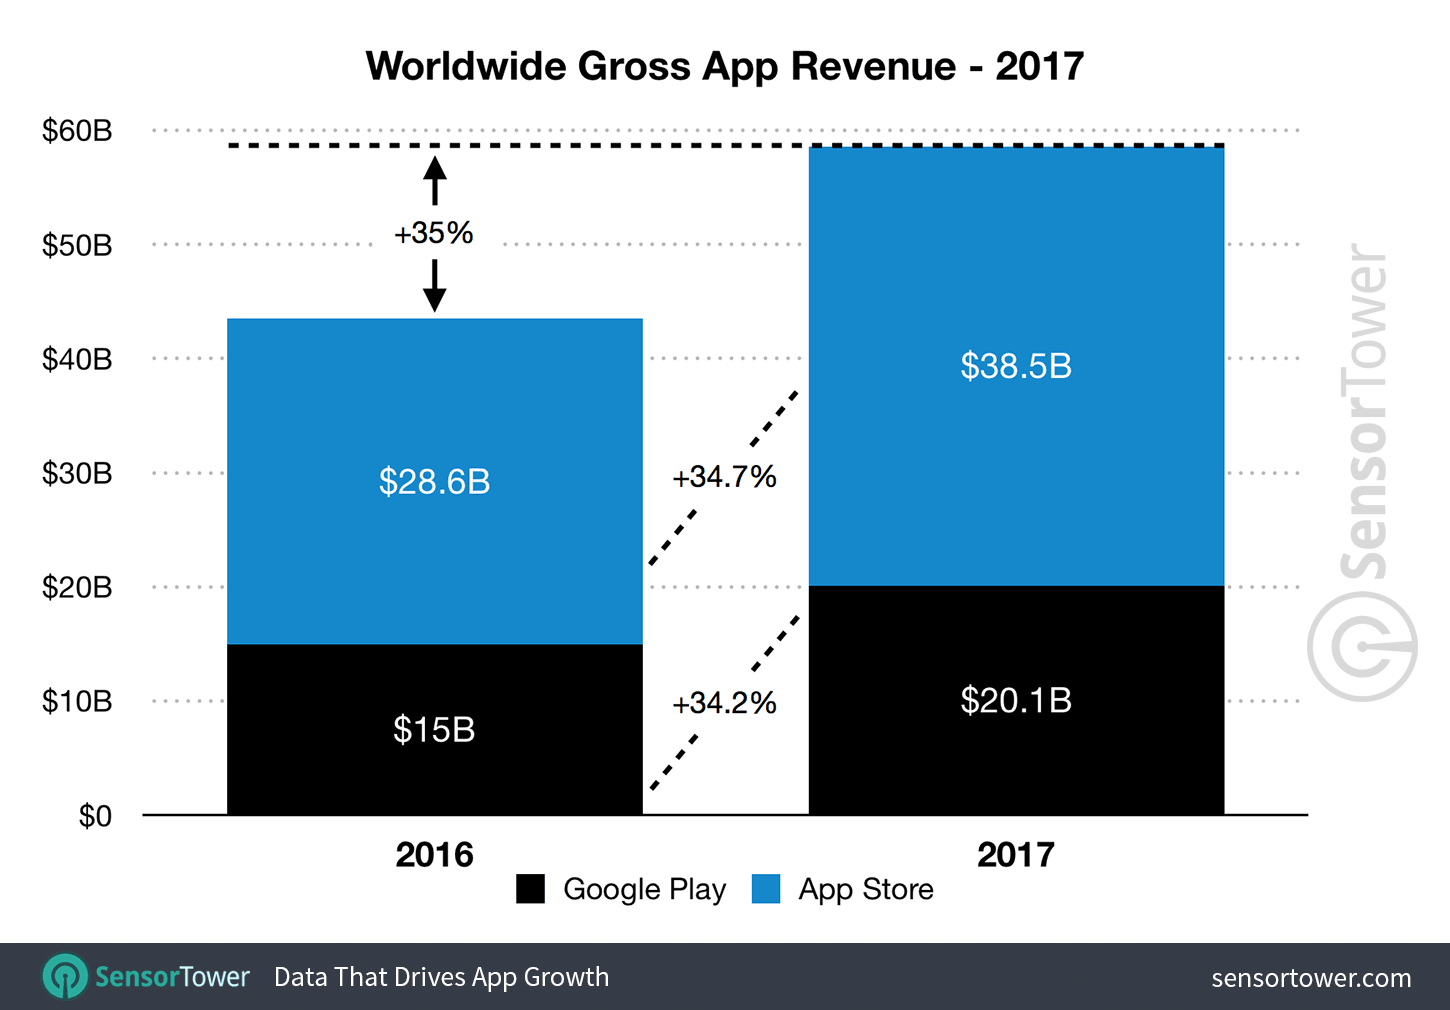 Gross app revenue (App Store and Google Play) in 2017